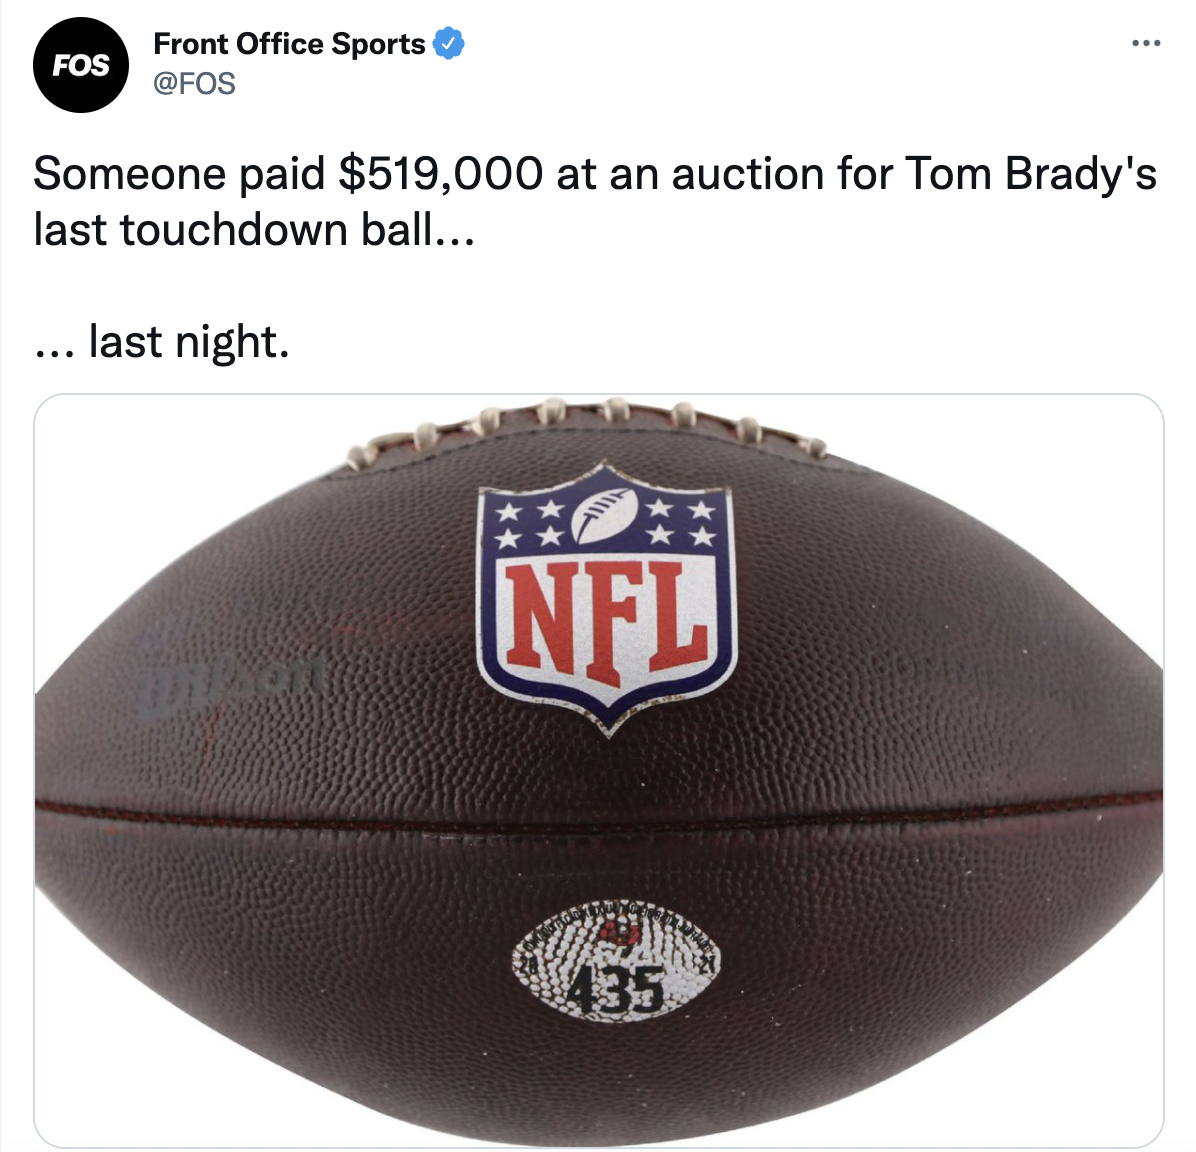 Tom Brady un-retirement memesball - Fos Front Office Sports Someone paid $519,000 at an auction for Tom Brady's last touchdown ball... ... last night. Nfl 435